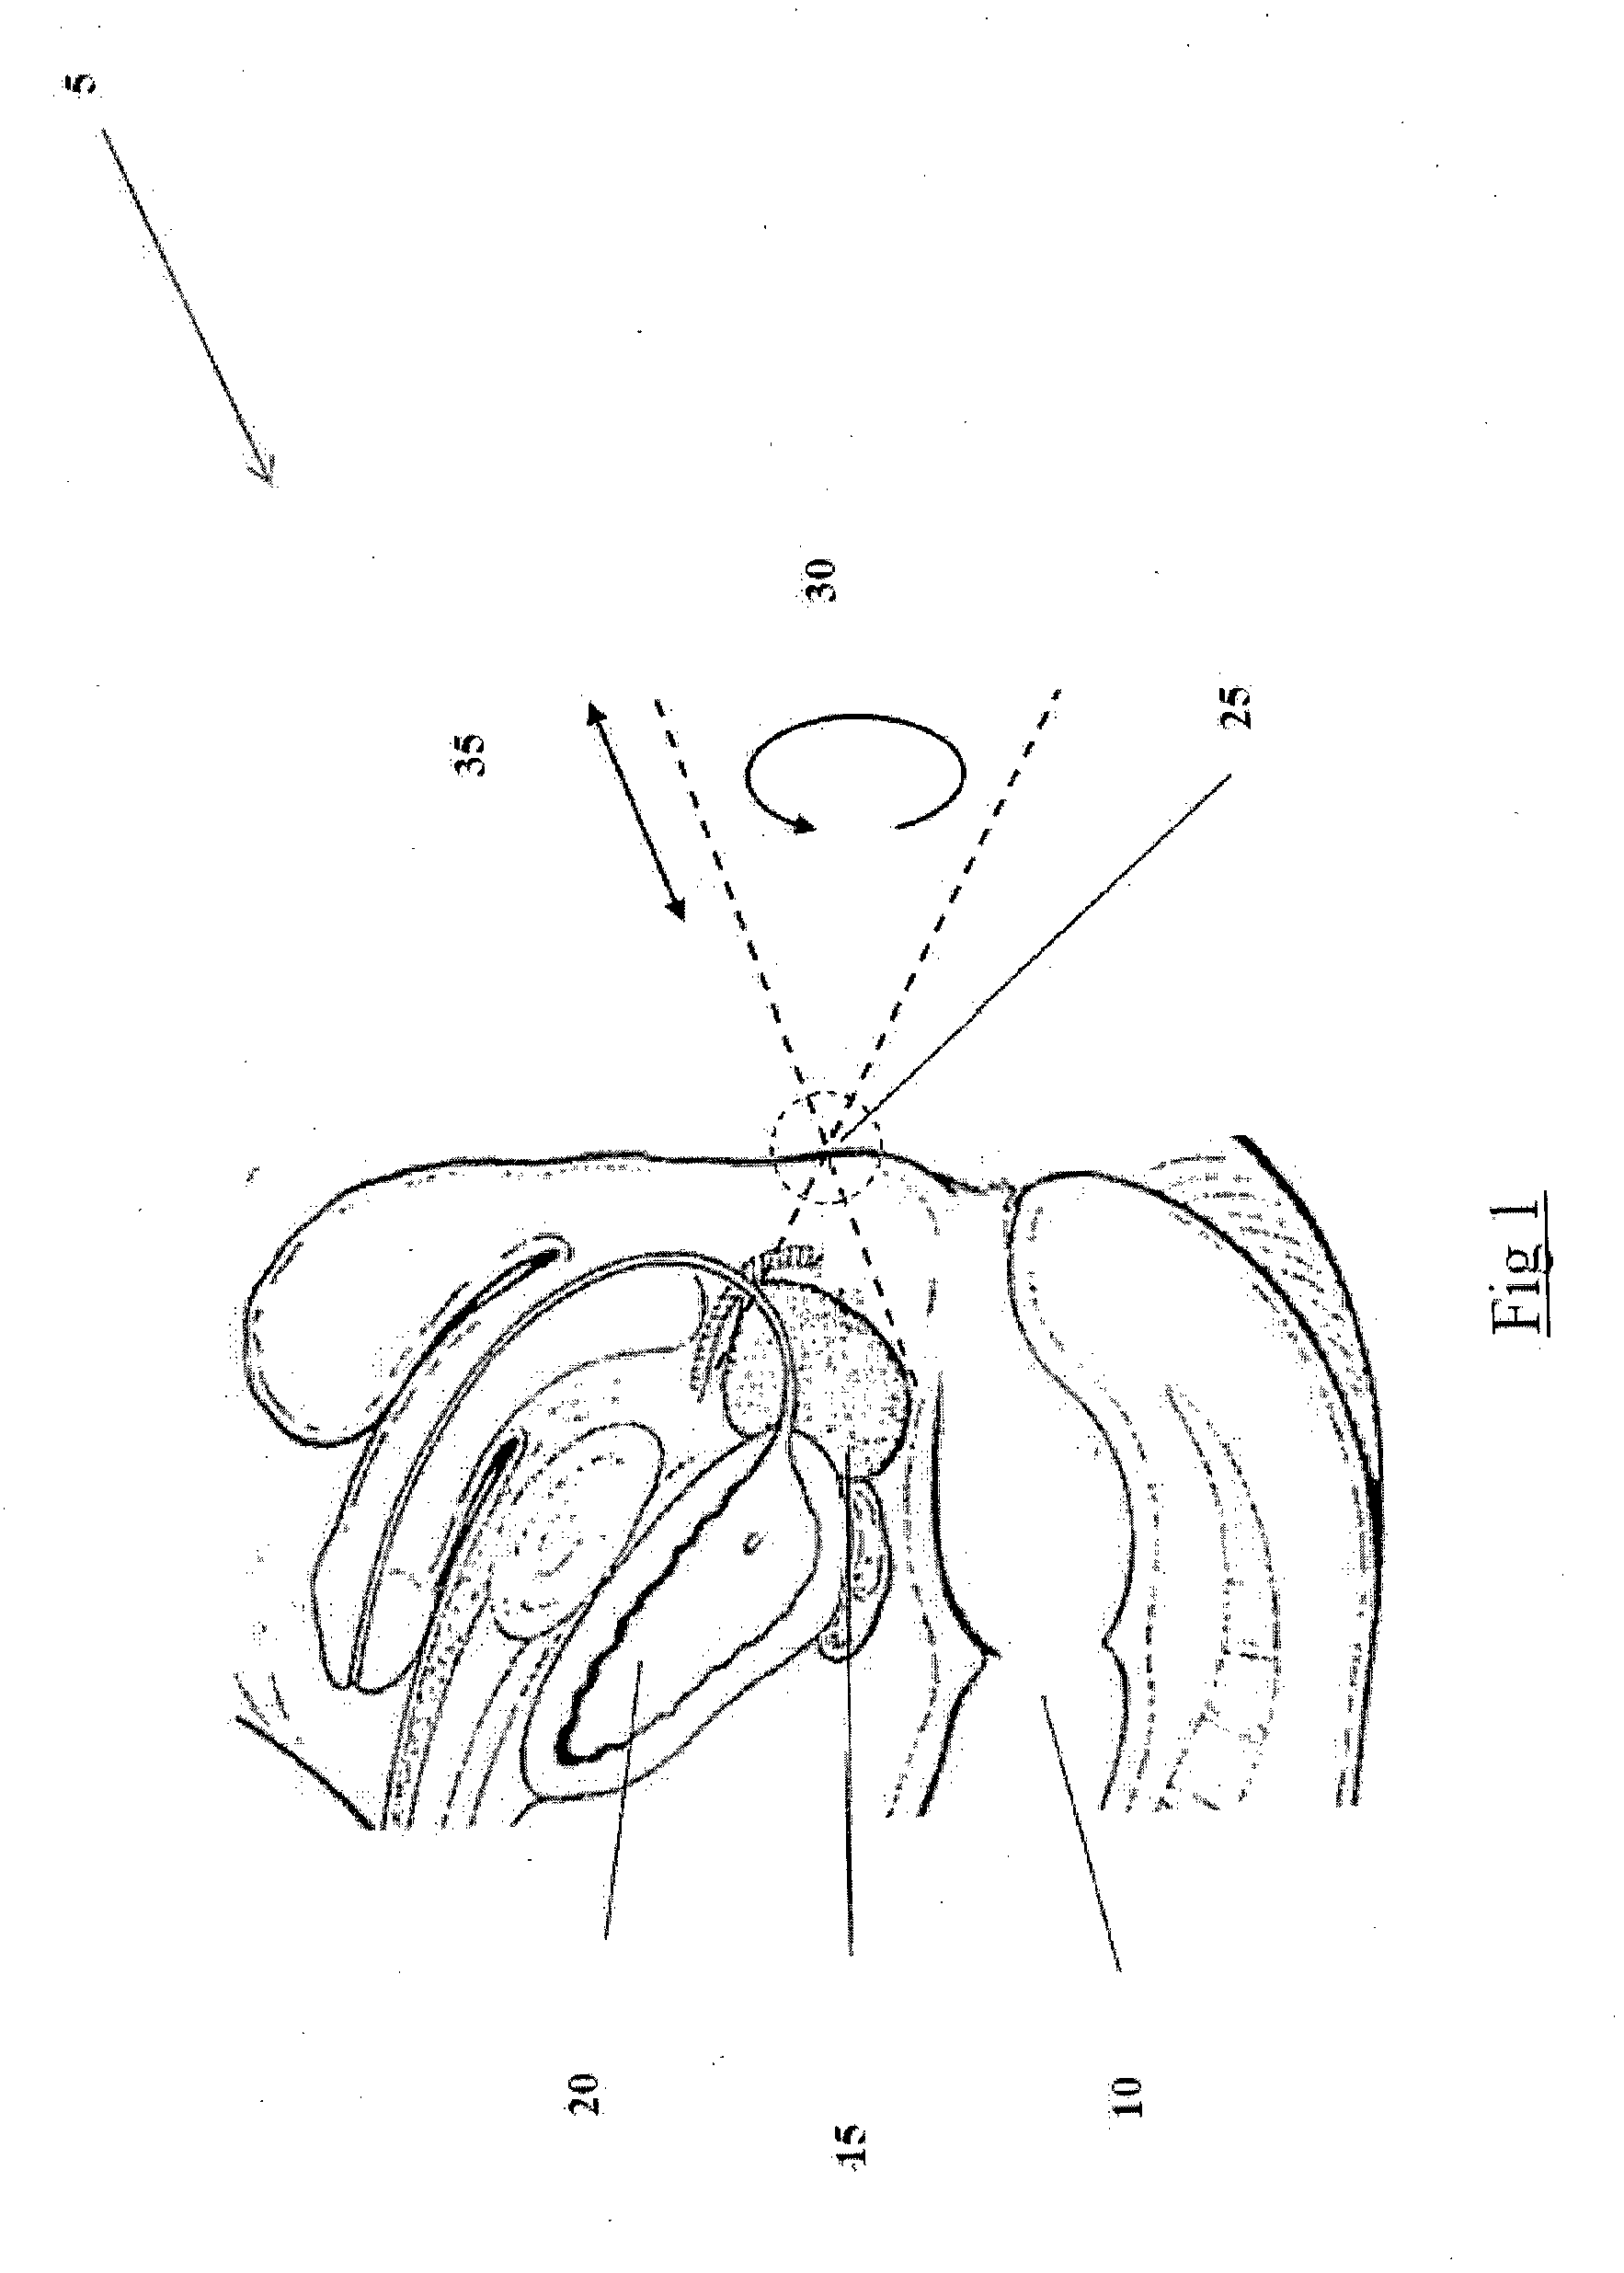 An apparatus and method for biopsy and therapy